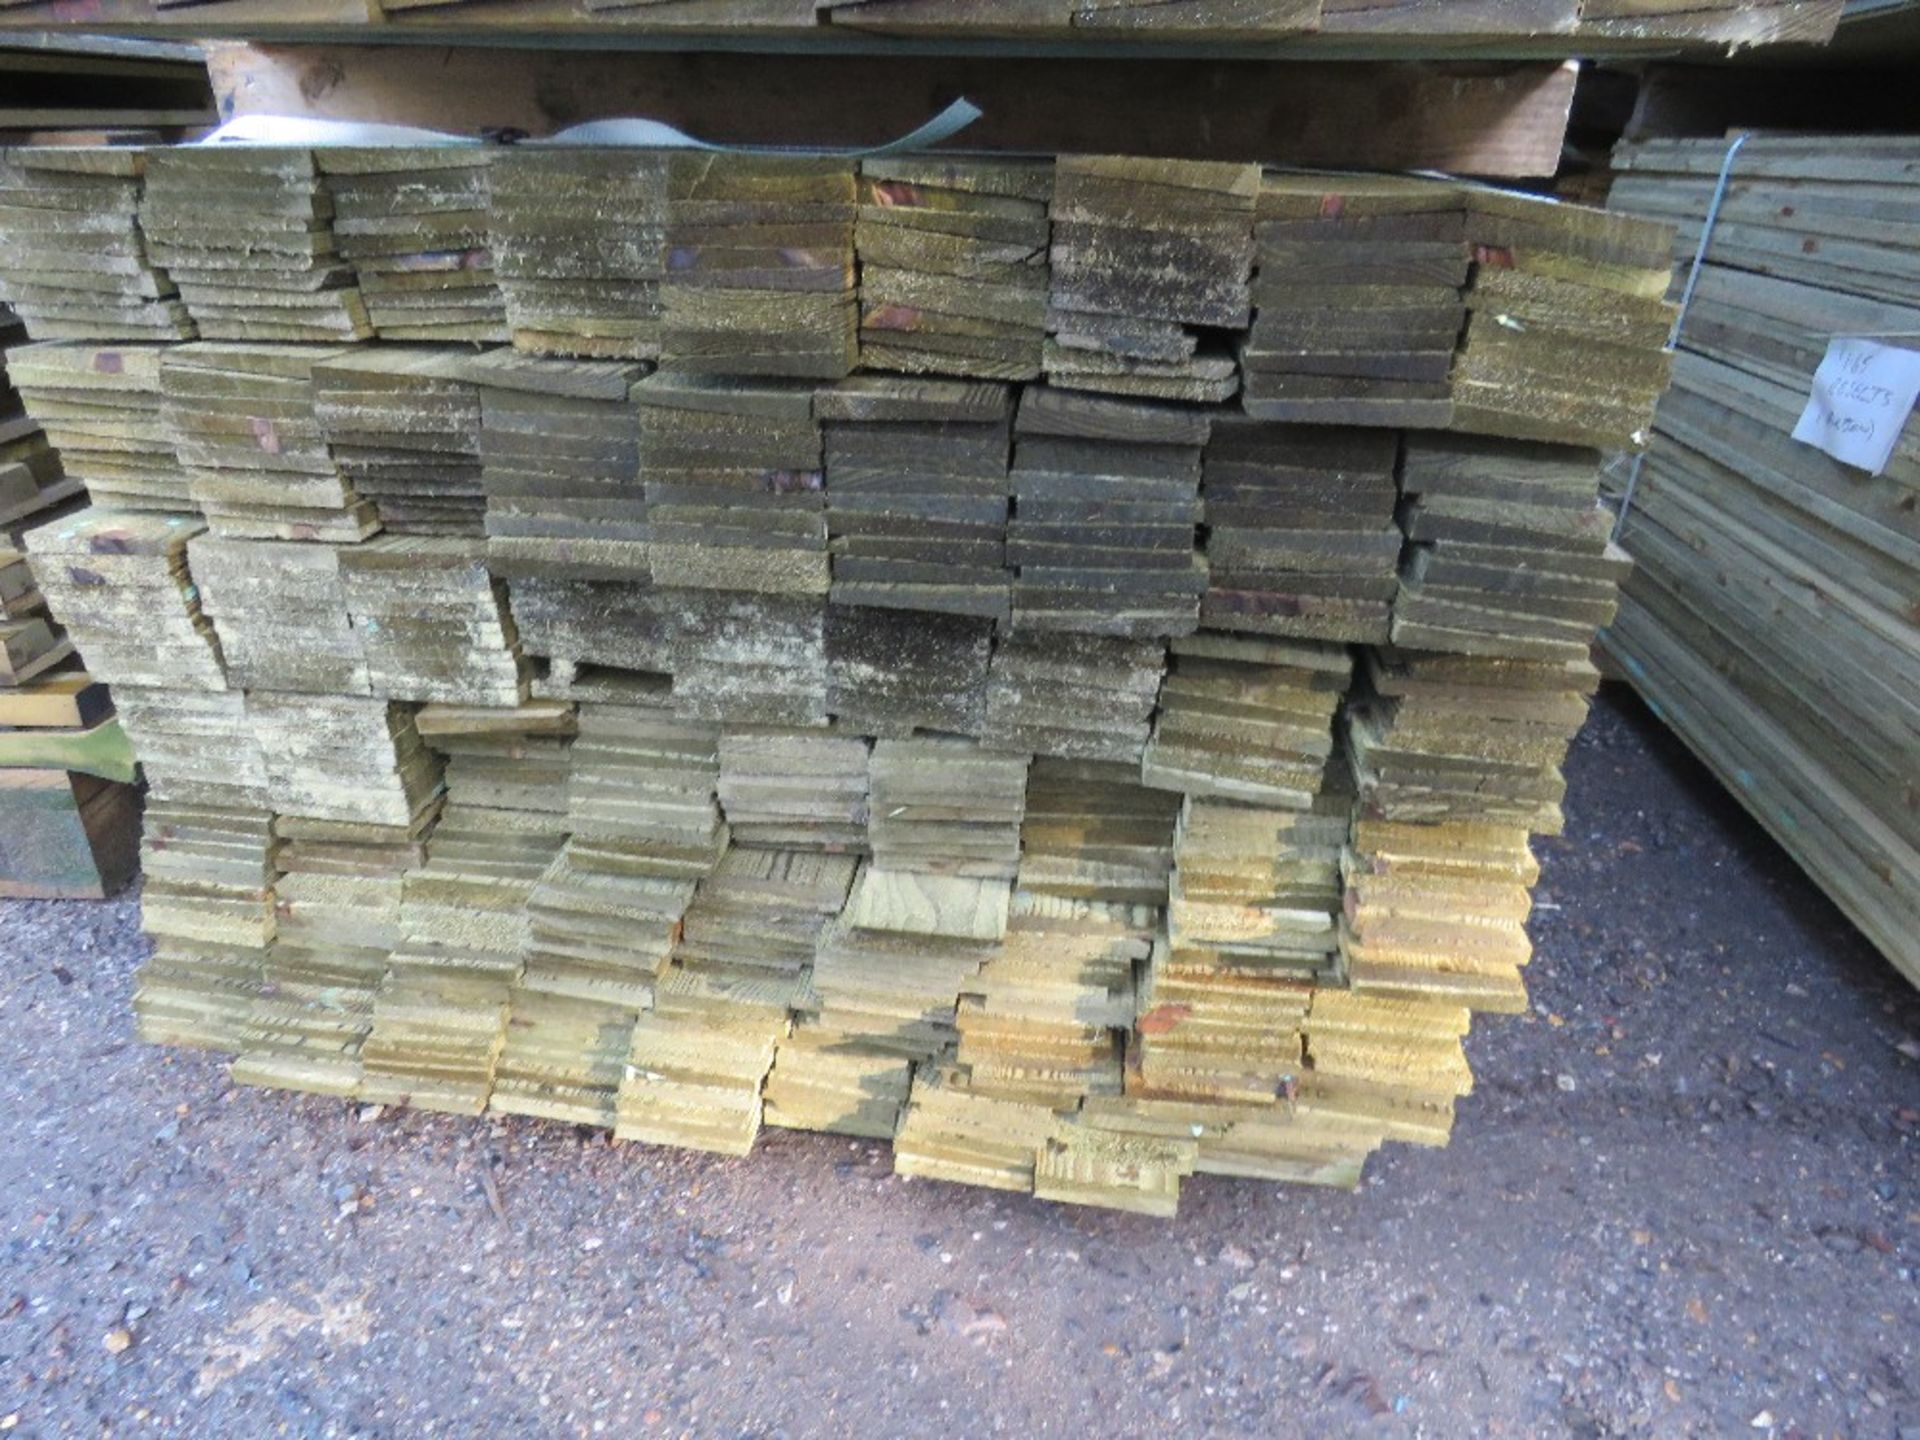 LARGE BUNDLE OF PRESSURE TREATED FEATHER EDGE TIMBER CLADDING: 1.65M LENGTH X 10CM WIDTH APPROX. - Image 2 of 3